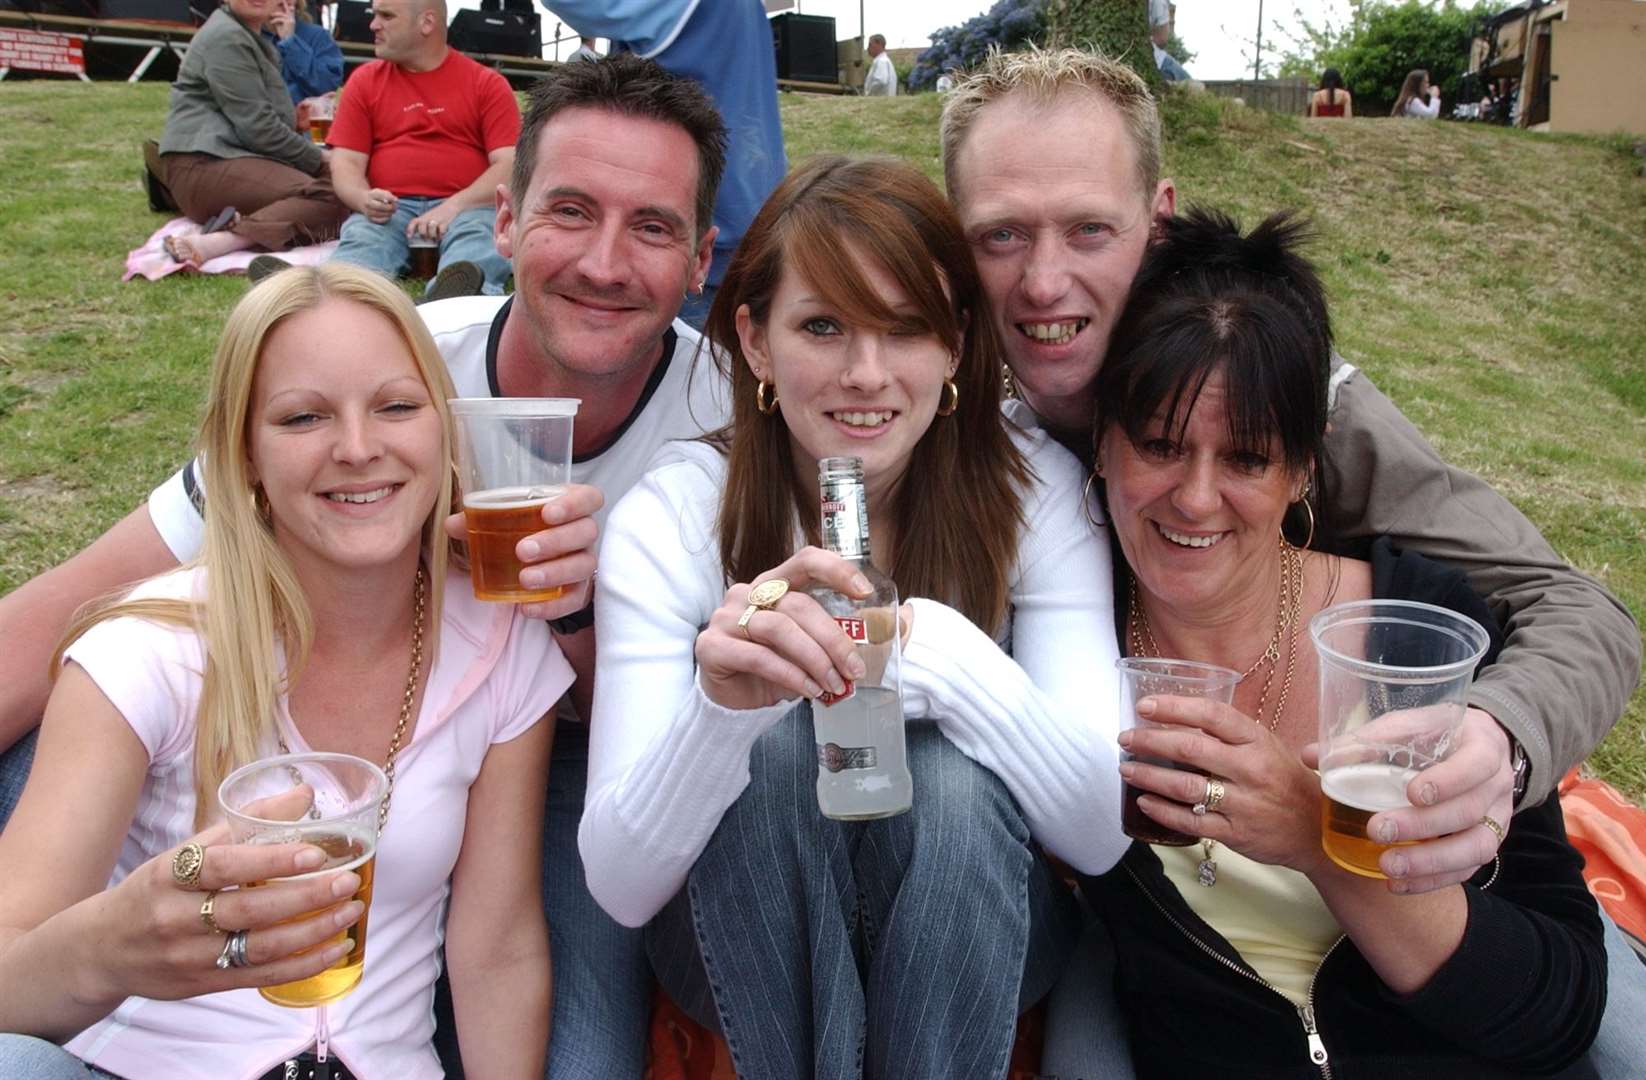 Punters at The Coach and Horses pub in Strood in May 2005. The pub, dating back to 1754, is still going today. Picture: Jim Rantell